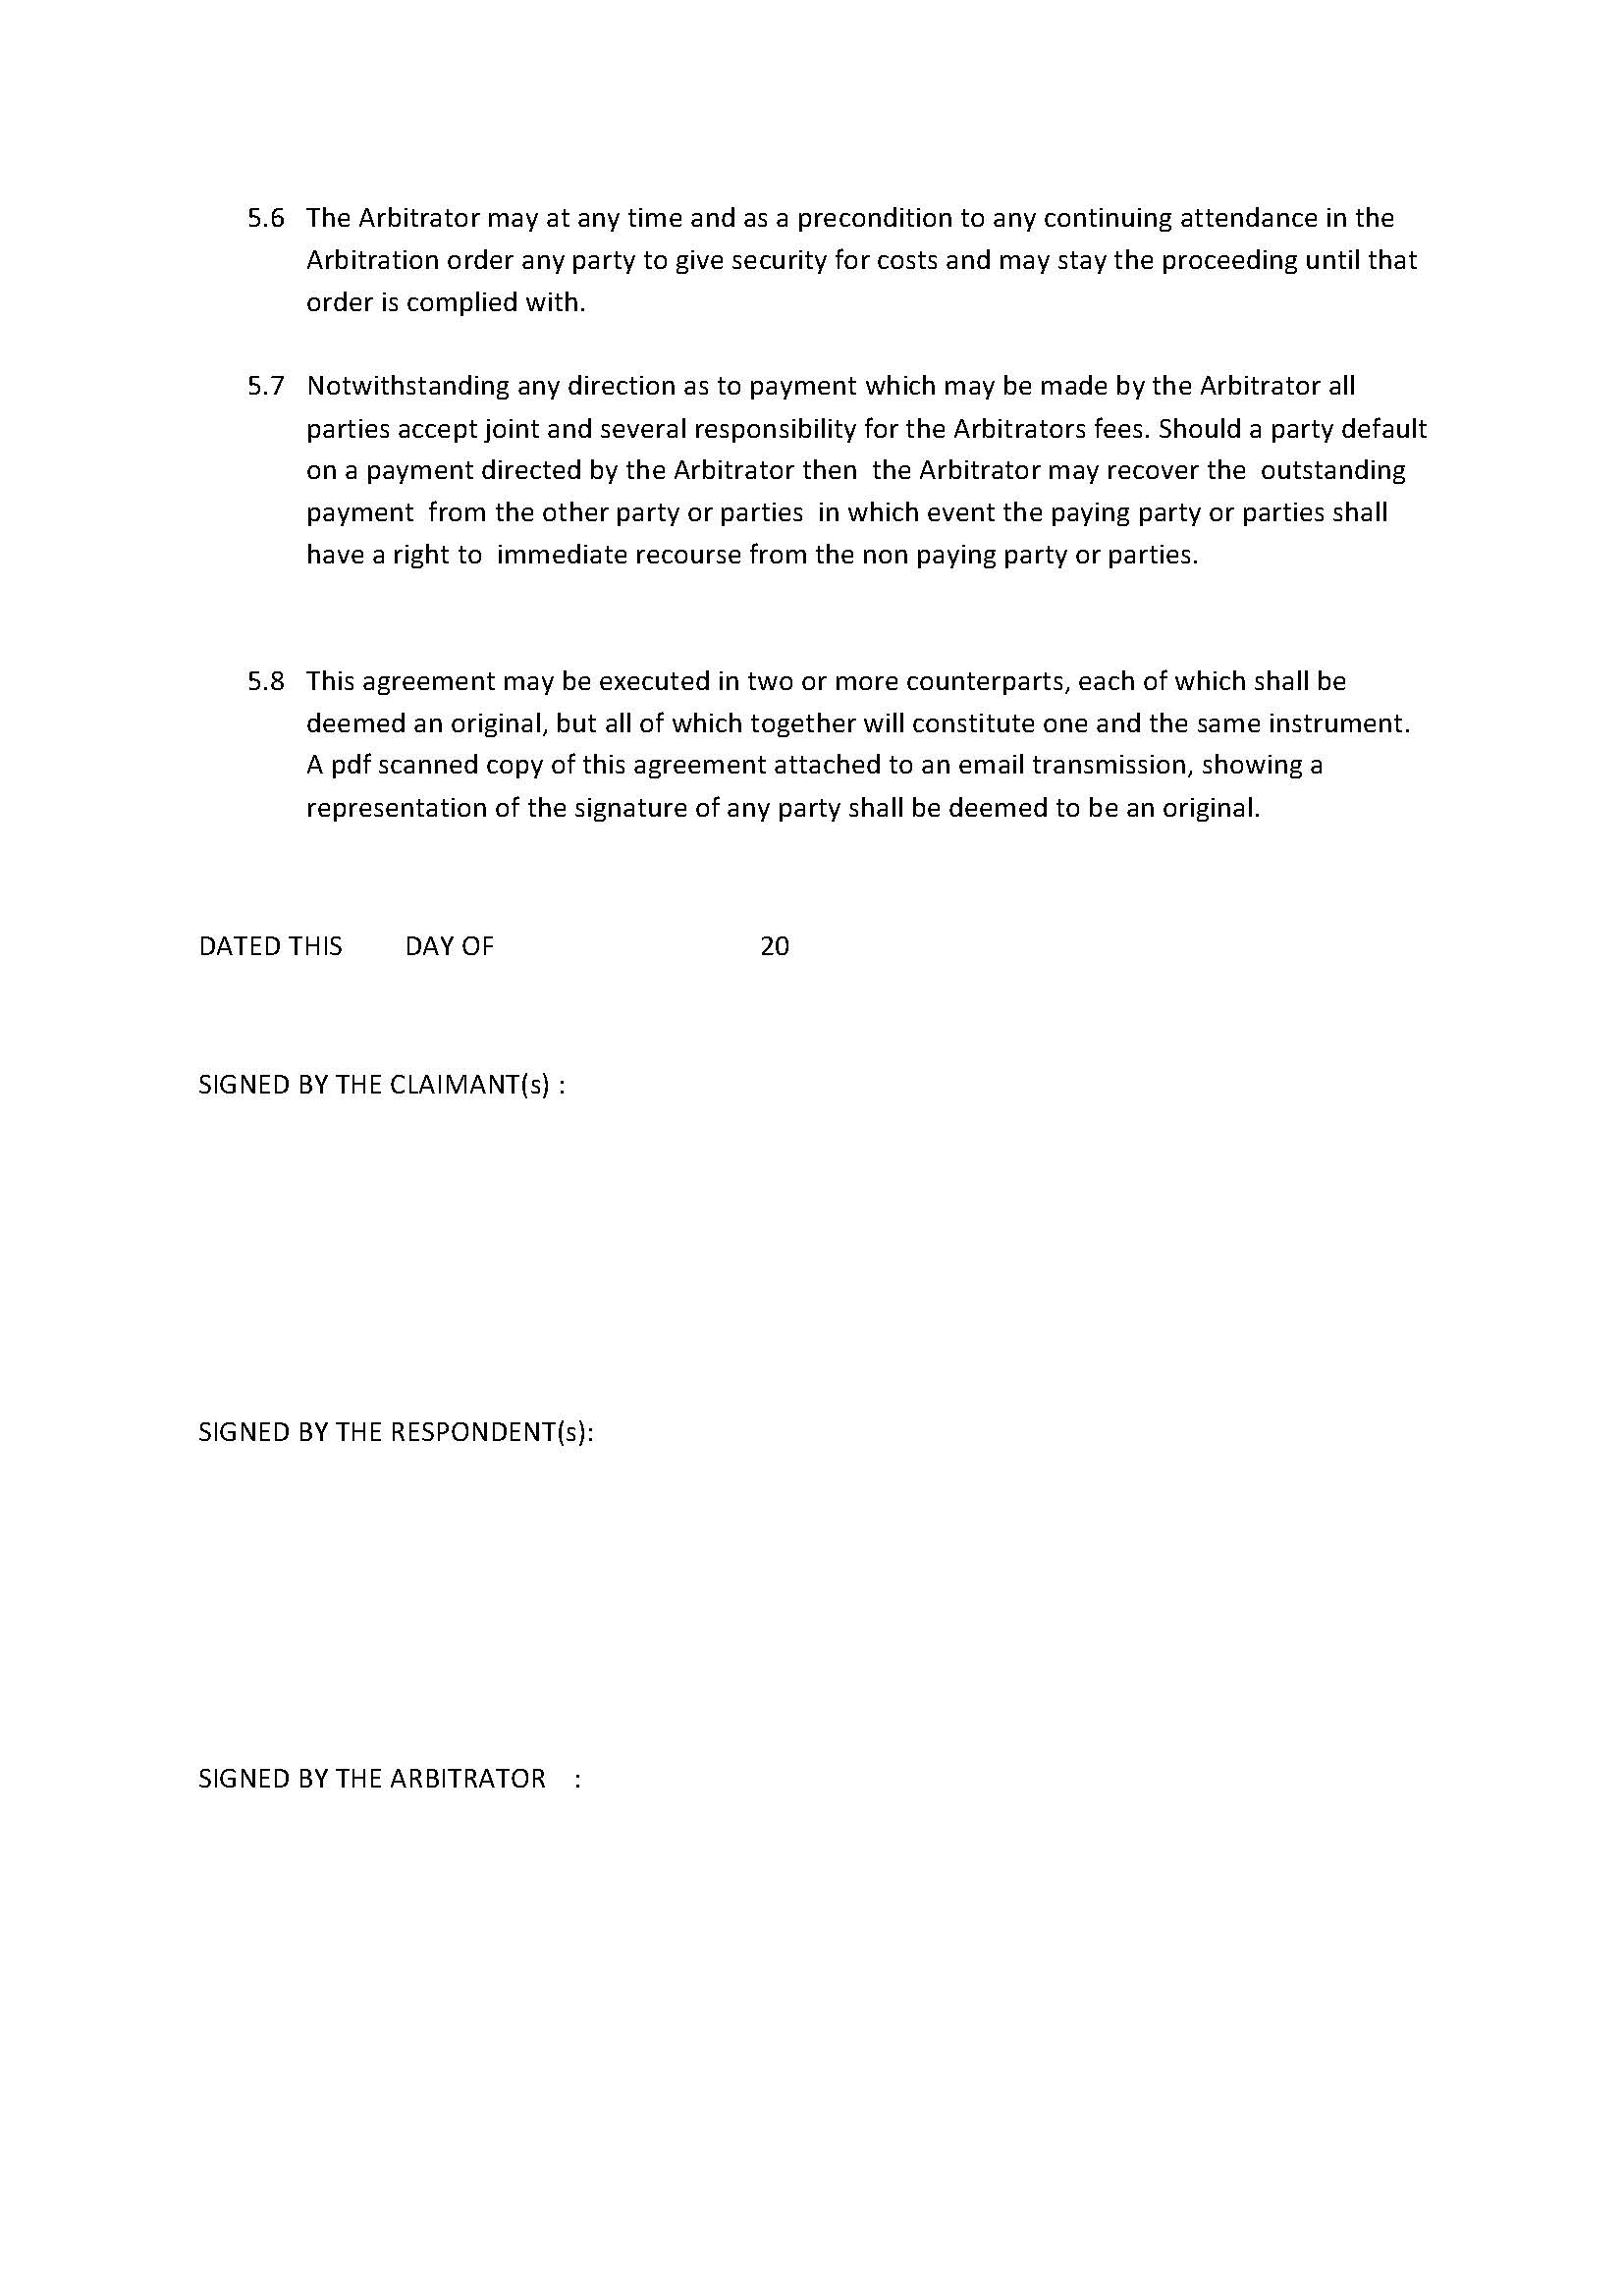 Arbitration Agreement recording terms of Appointment of Engagement _Page_3.jpg